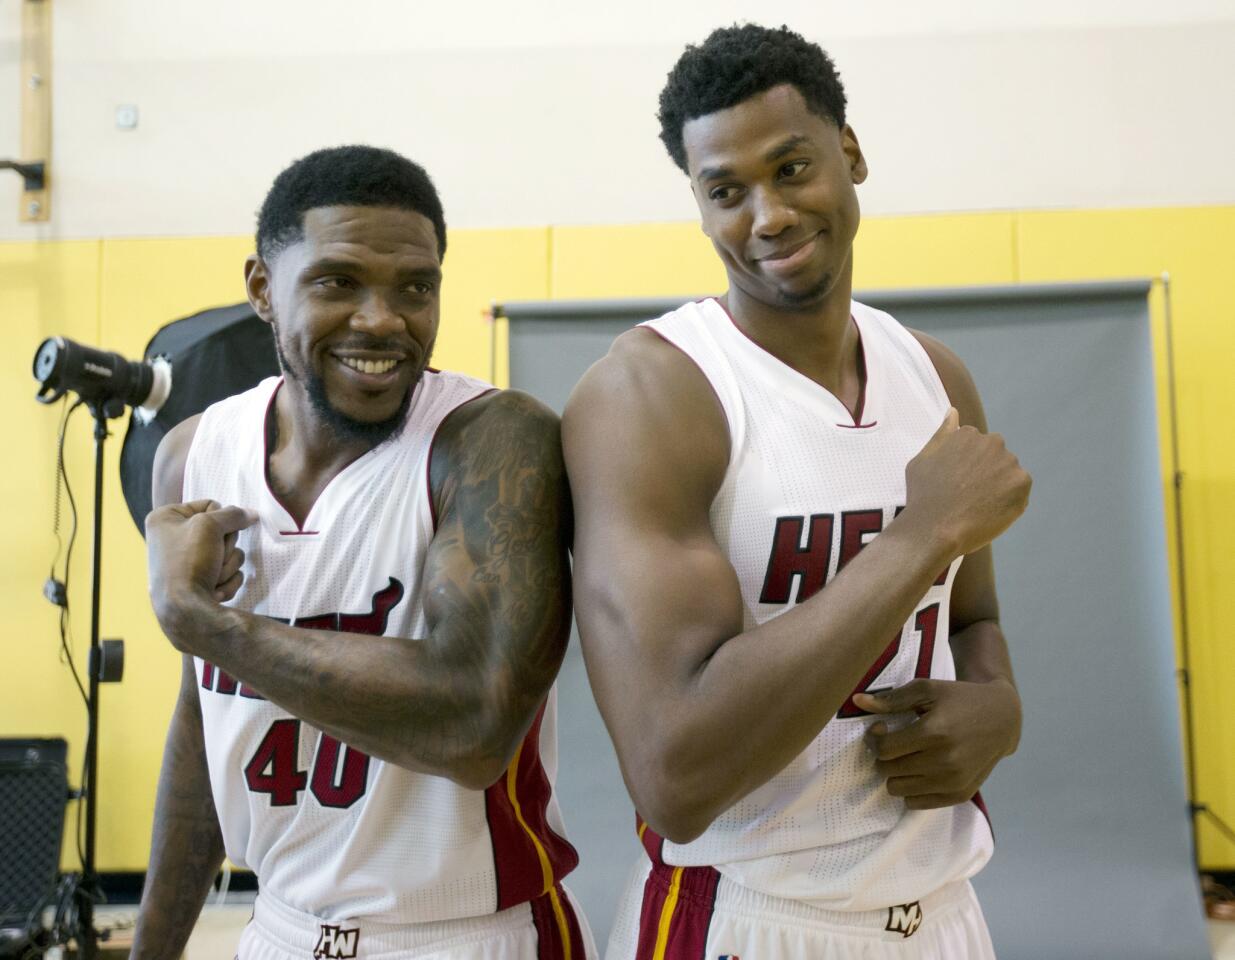 Miami Heat players Udonis Haslem (40), left, and Hassan Whiteside pose during the Miami Heat media day, Monday, Sept. 26, 2016, in Miami, Fla. (AP Photo/Wilfredo Lee)